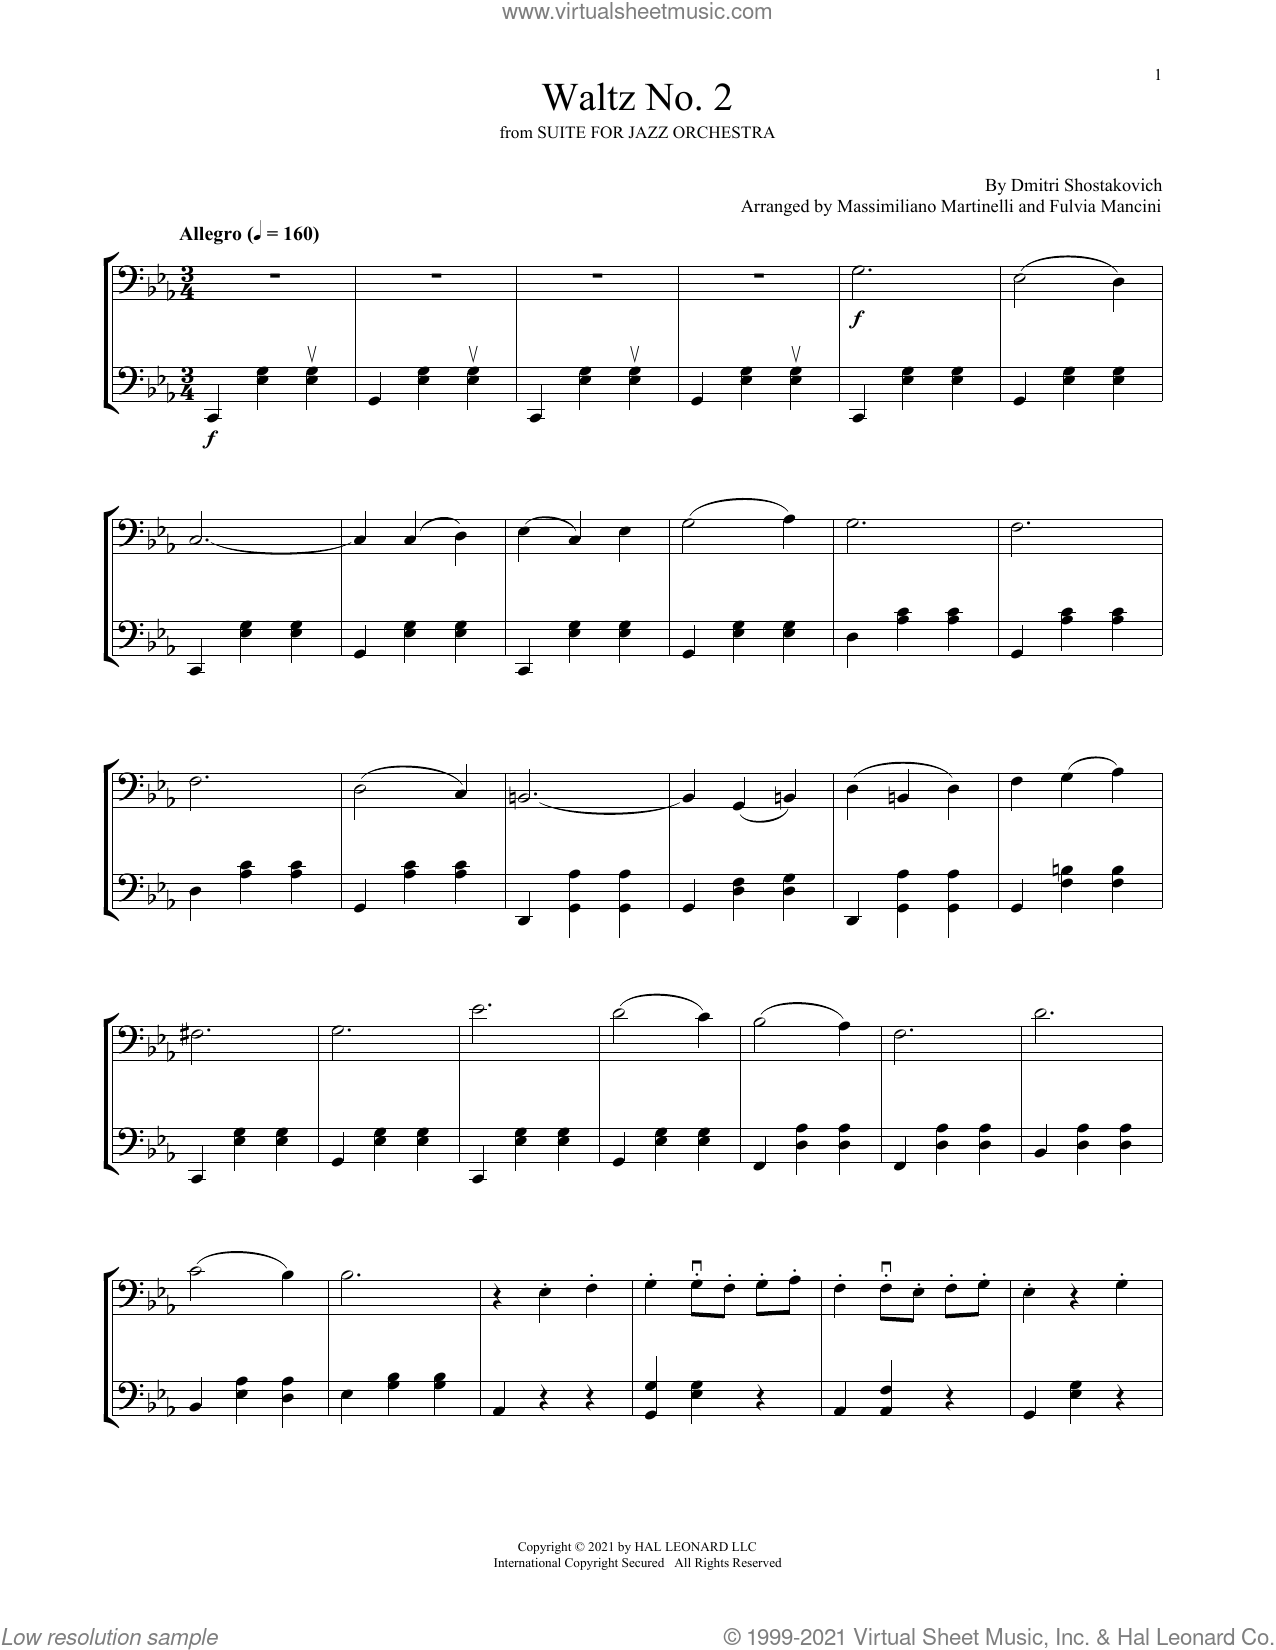 Waltz No. 2 sheet music for two cellos (duet, duets) (PDF)